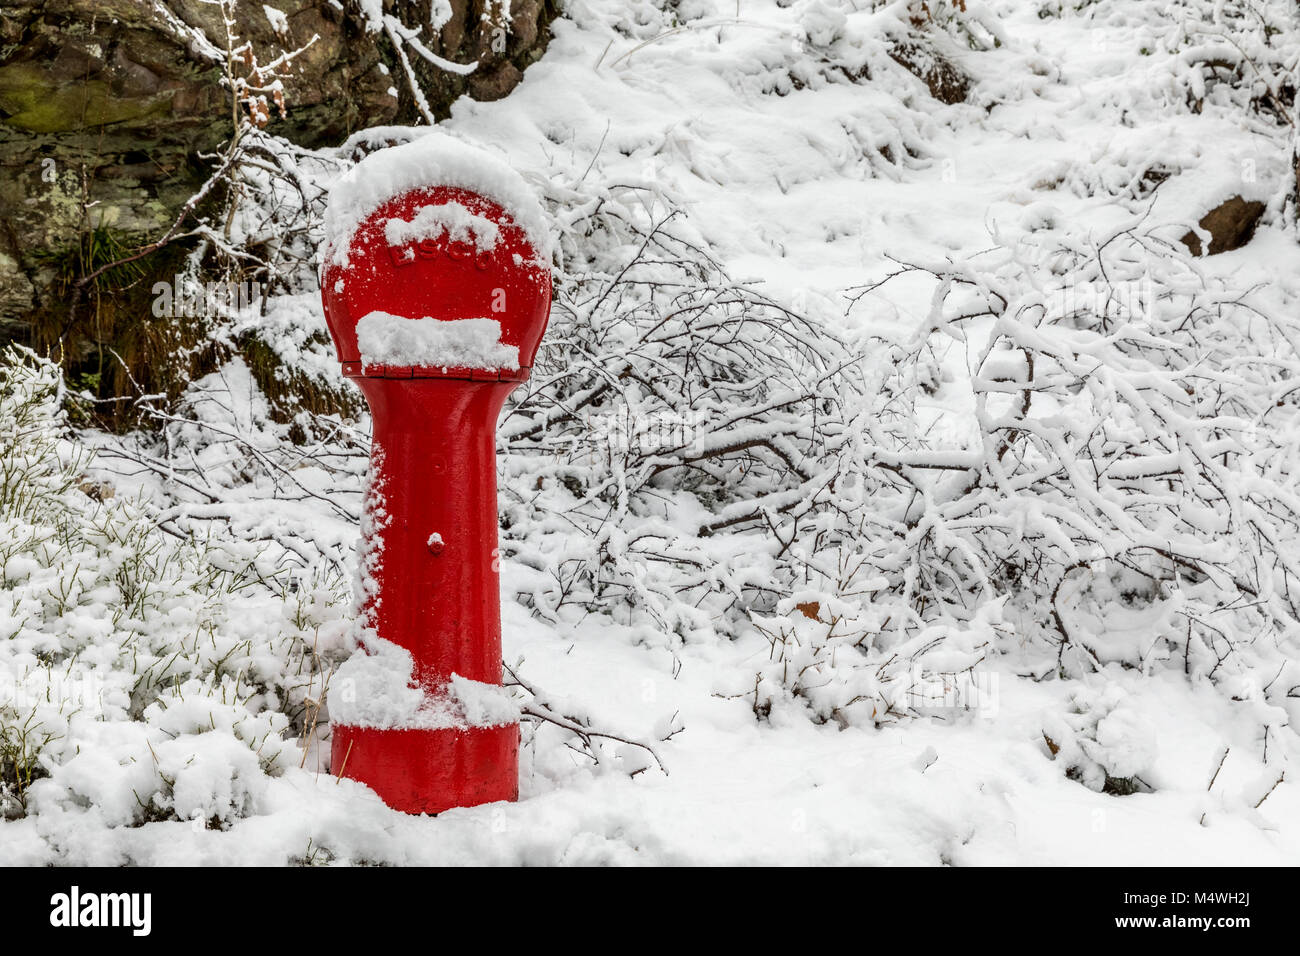 Red fire hydrant covered in snow. Picture taken in winter, snow on the ground. Stock Photo